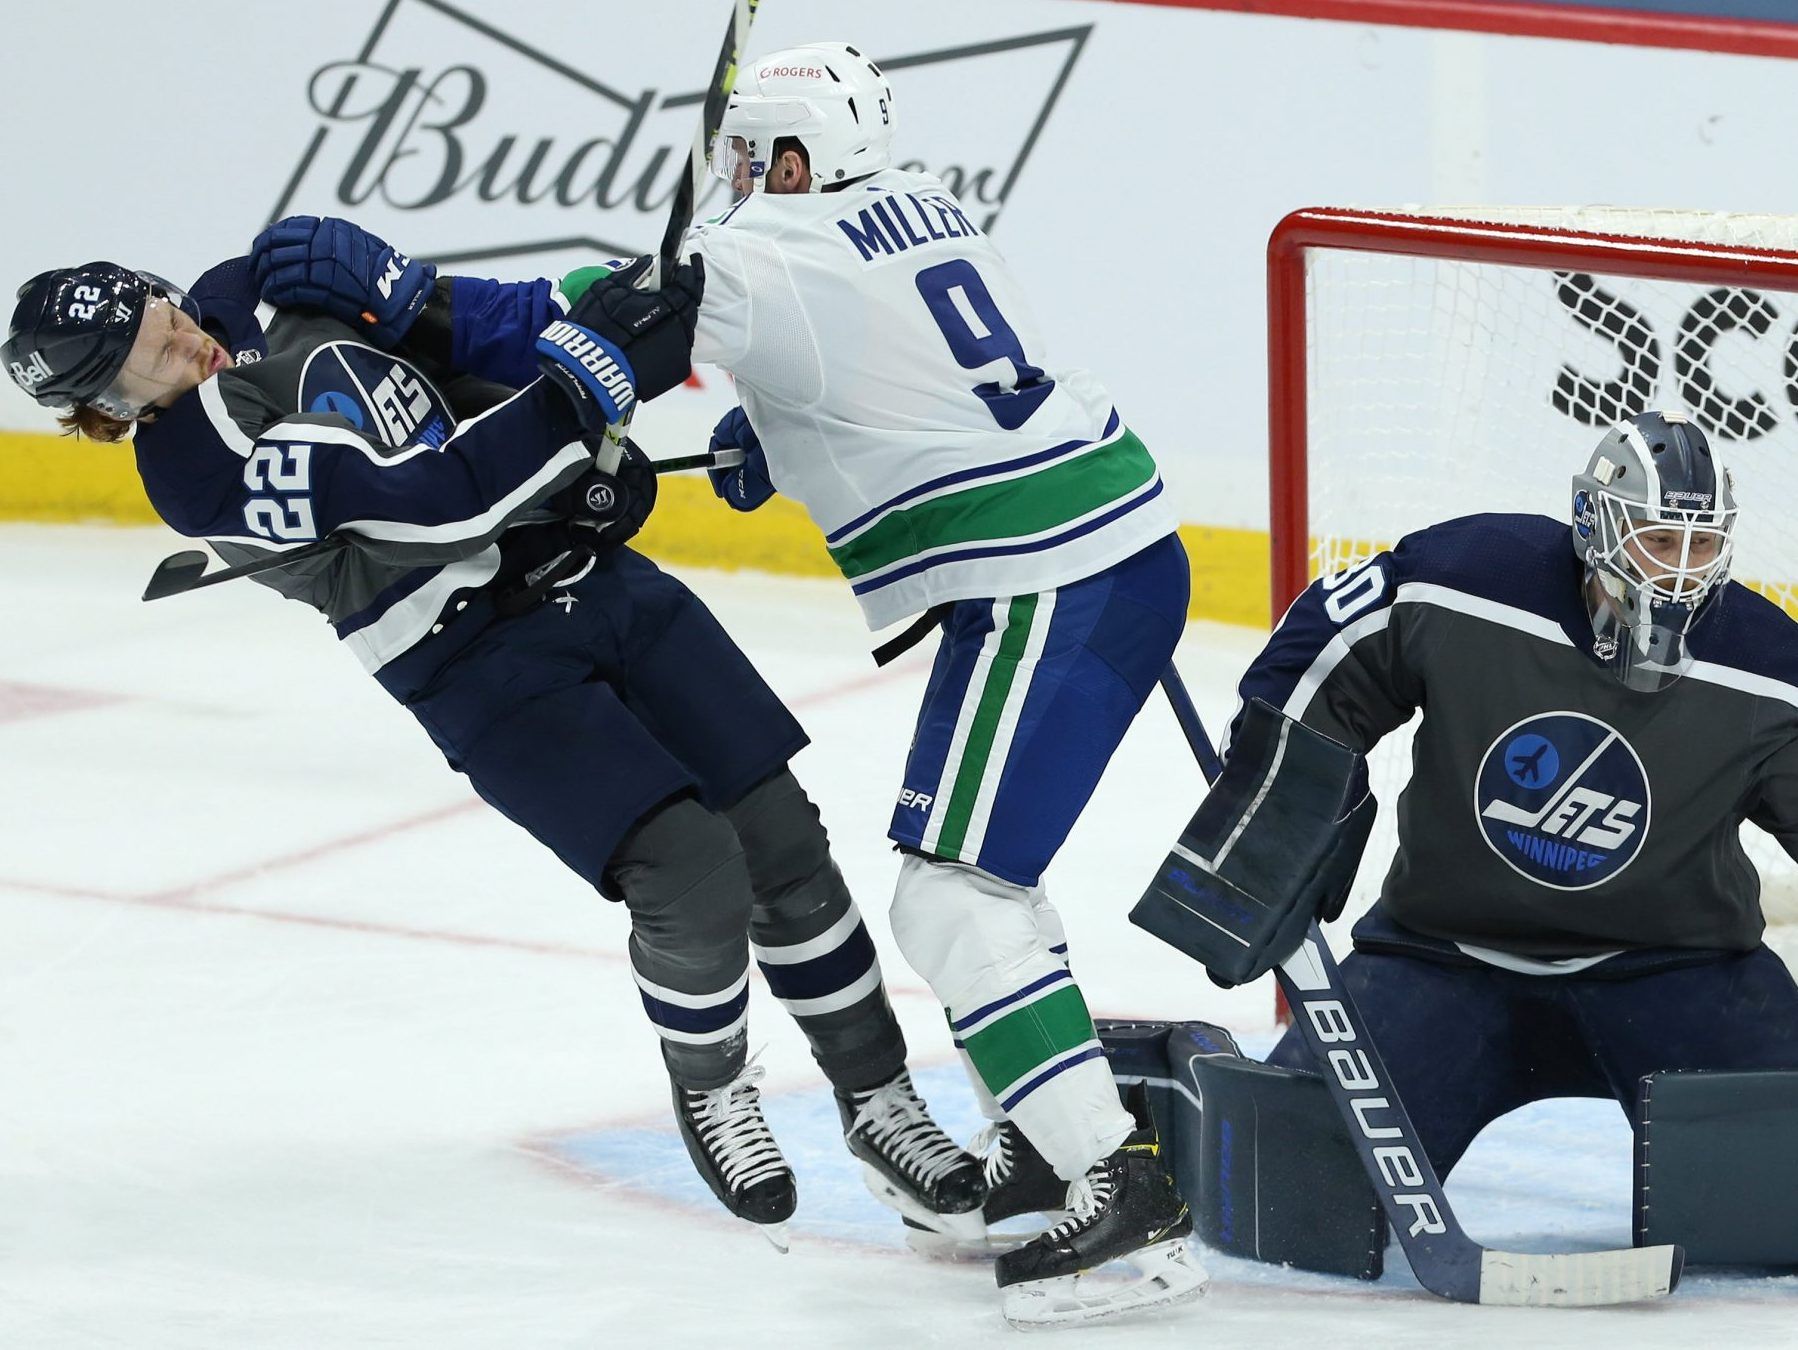 Canucks' Poolman exits mid-game as team says he has been placed in